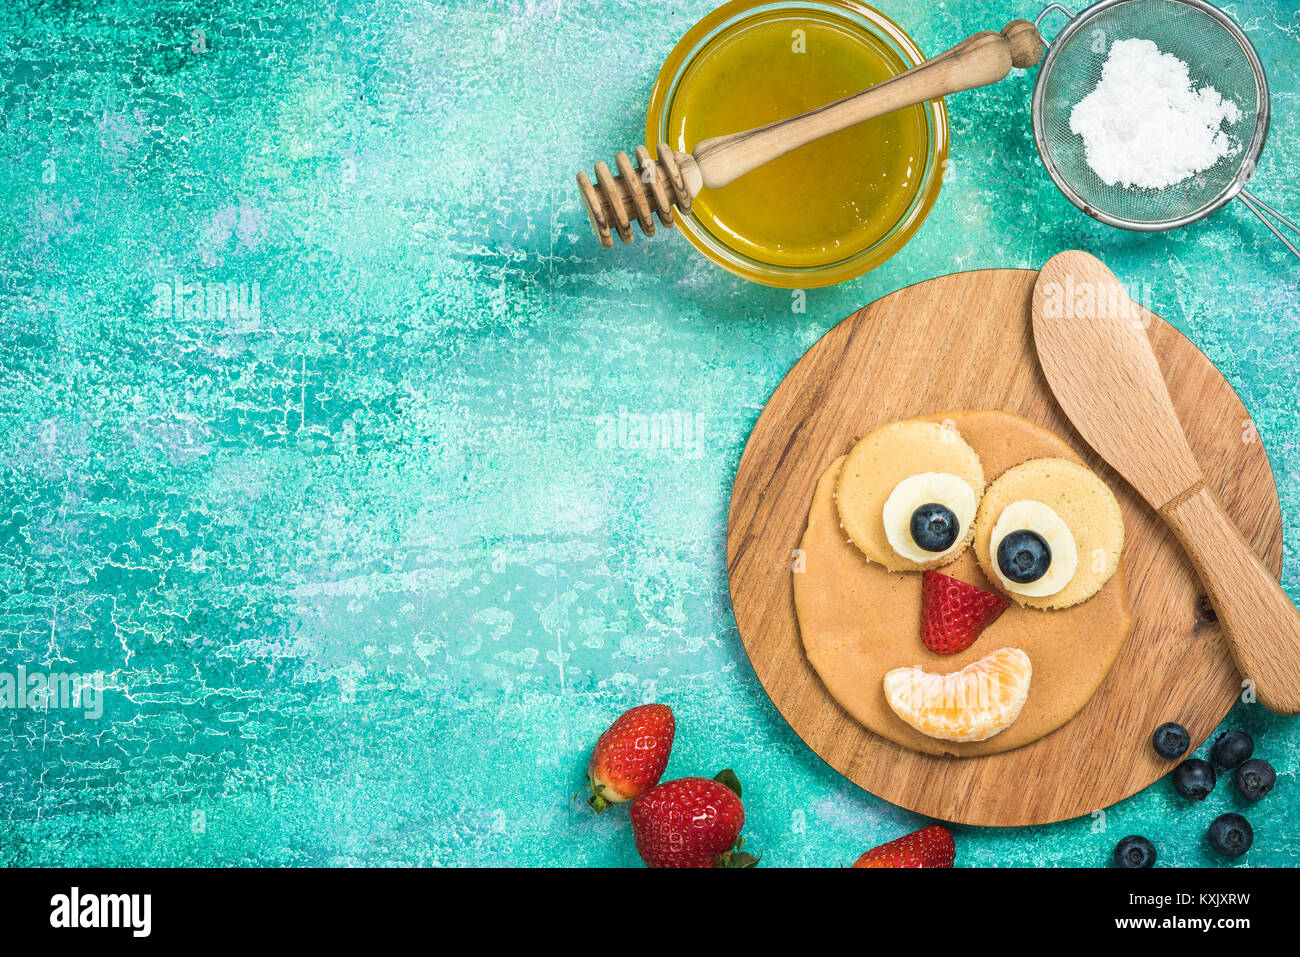 Making perfect pancakes for kids on Shrove Tuesday, copy space border background Stock Photo